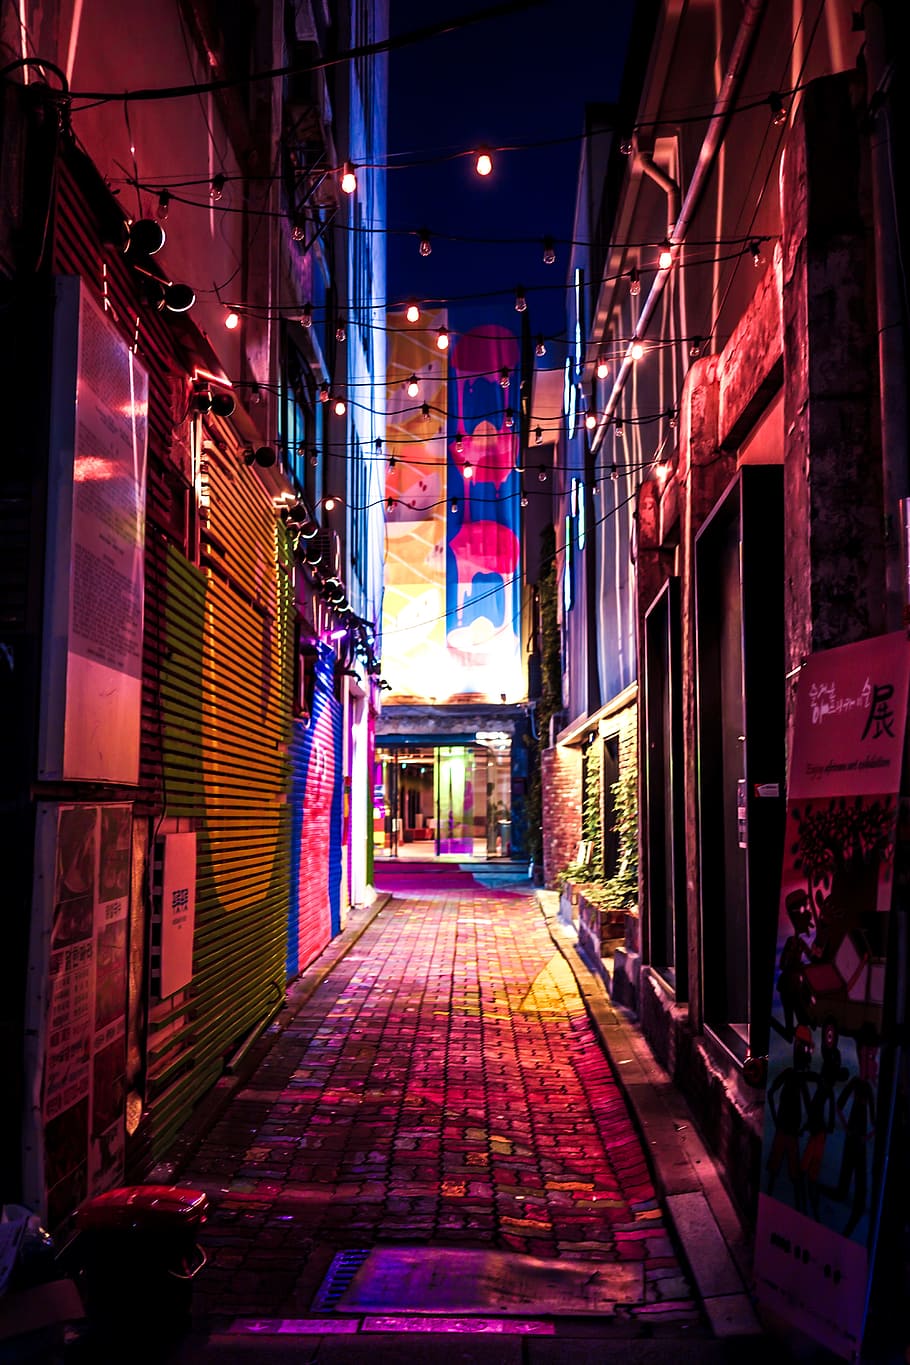 Lighted Up Alleyway, architecture, buildings, business, cobblestone street